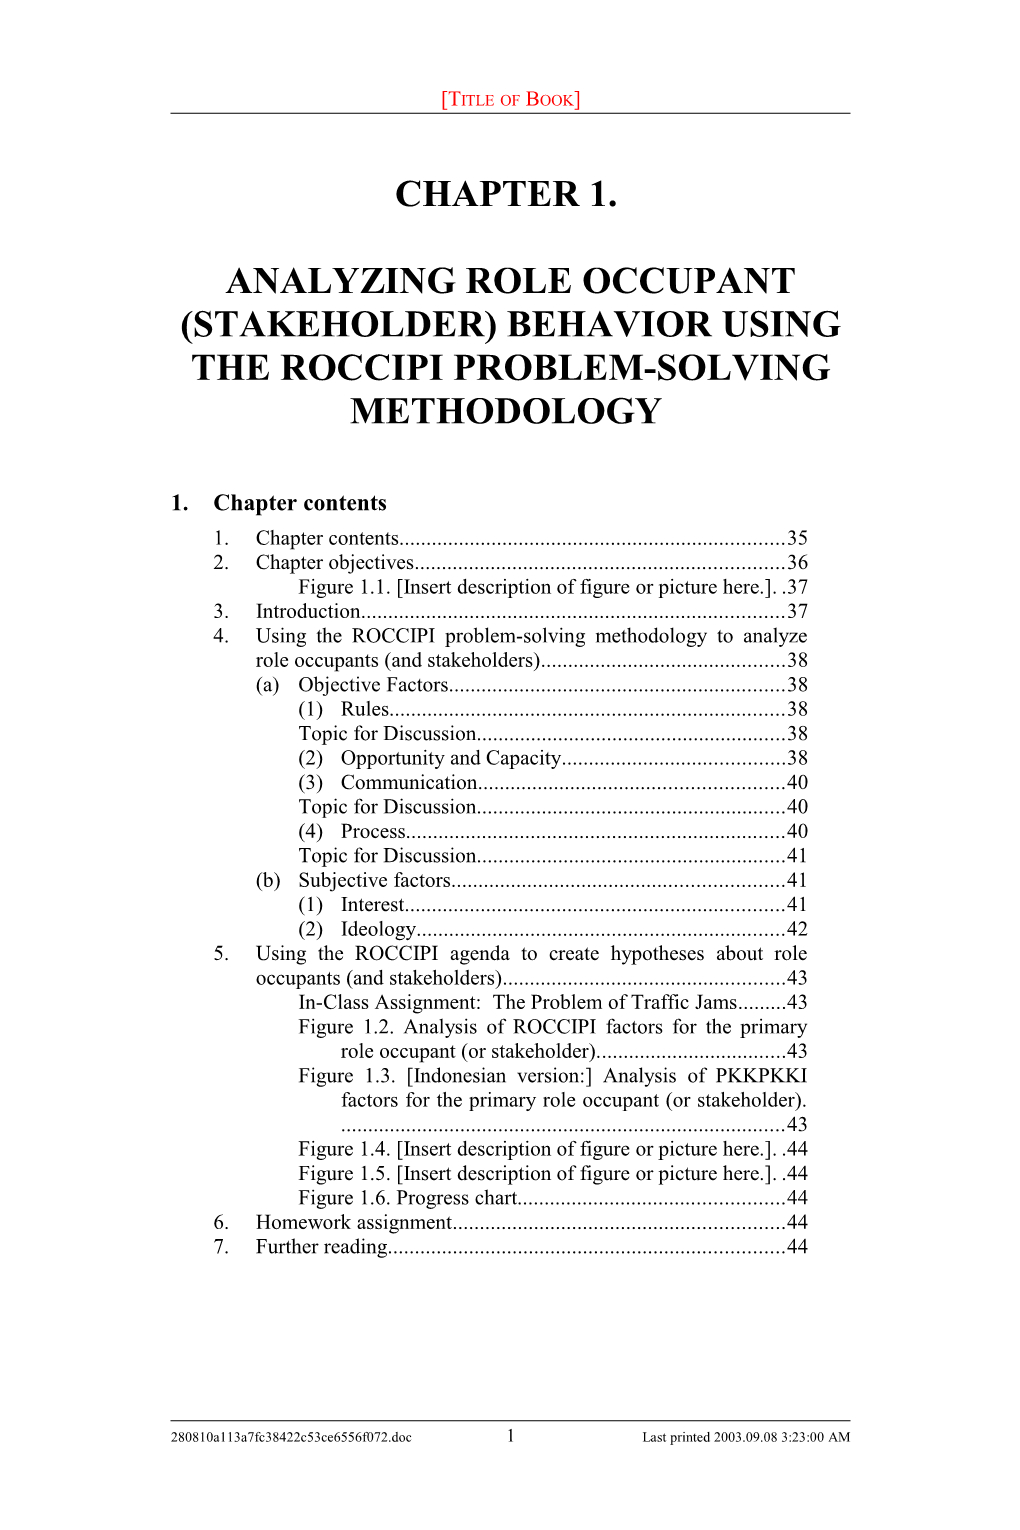 Analyzing Role Occupant (Stakeholder) Behavior Using the ROCCIPI Problem-Solving Methodology